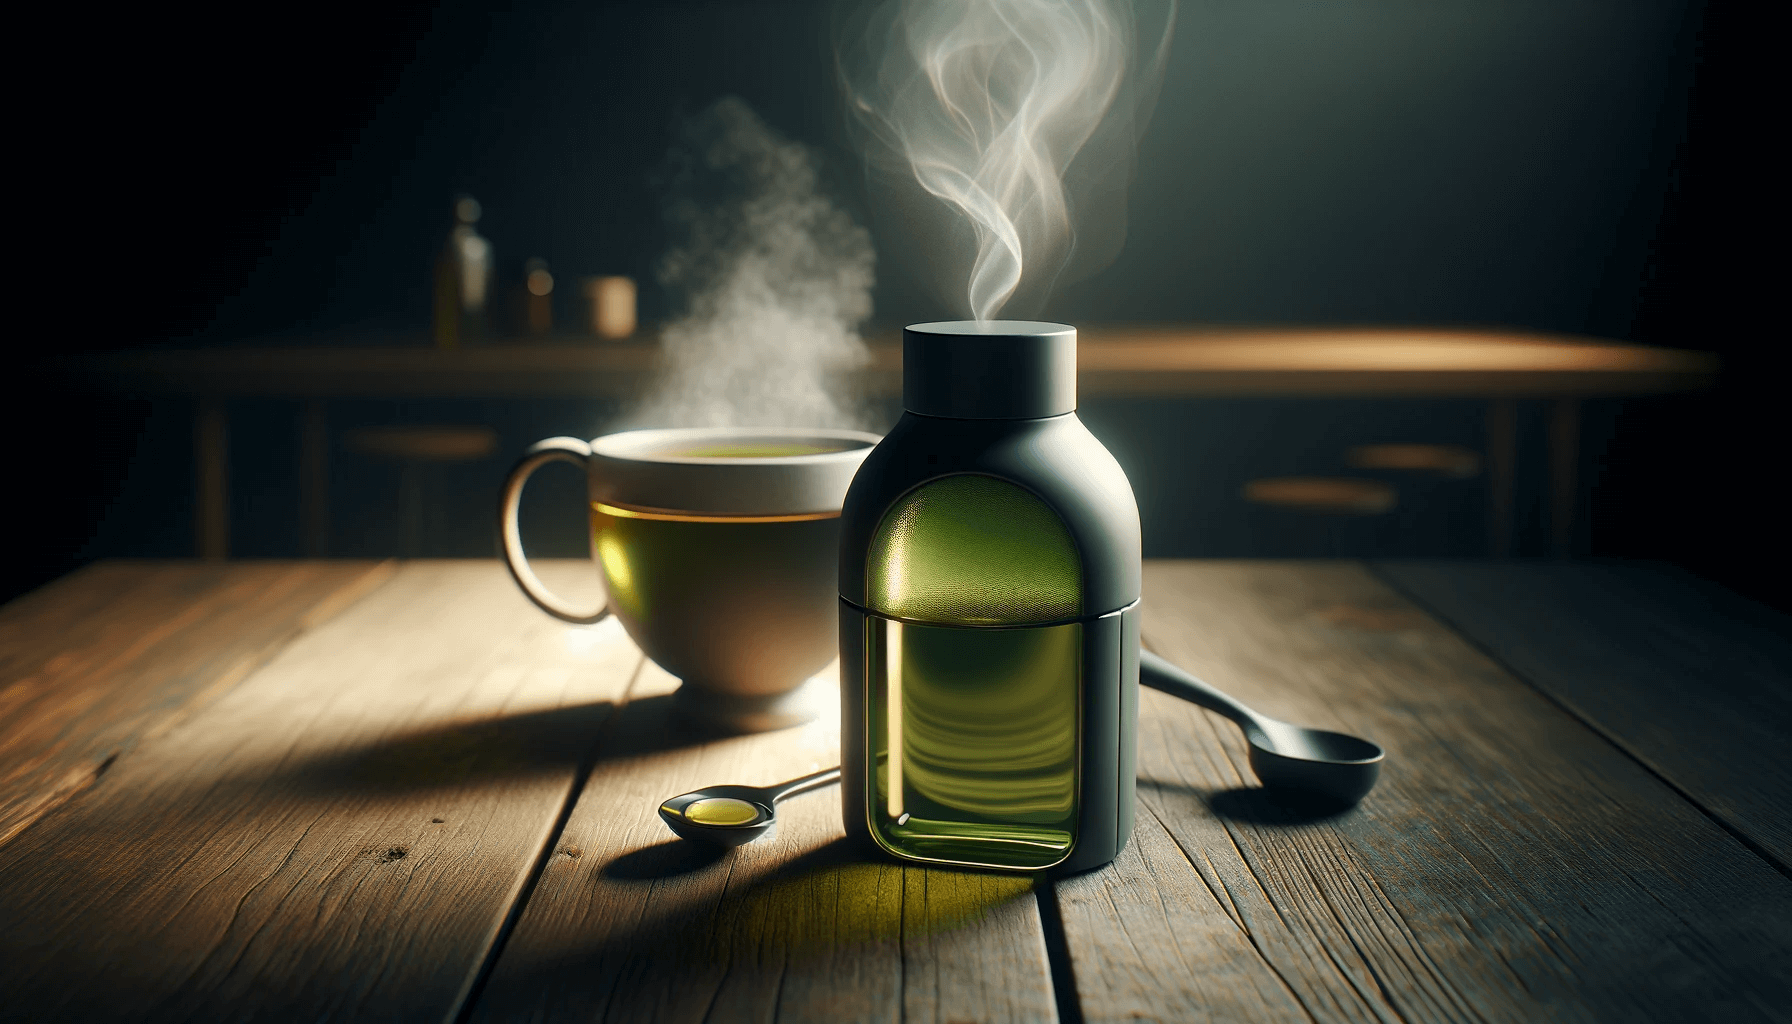 Oregano oil bottle placed next to a steaming cup of herbal tea.